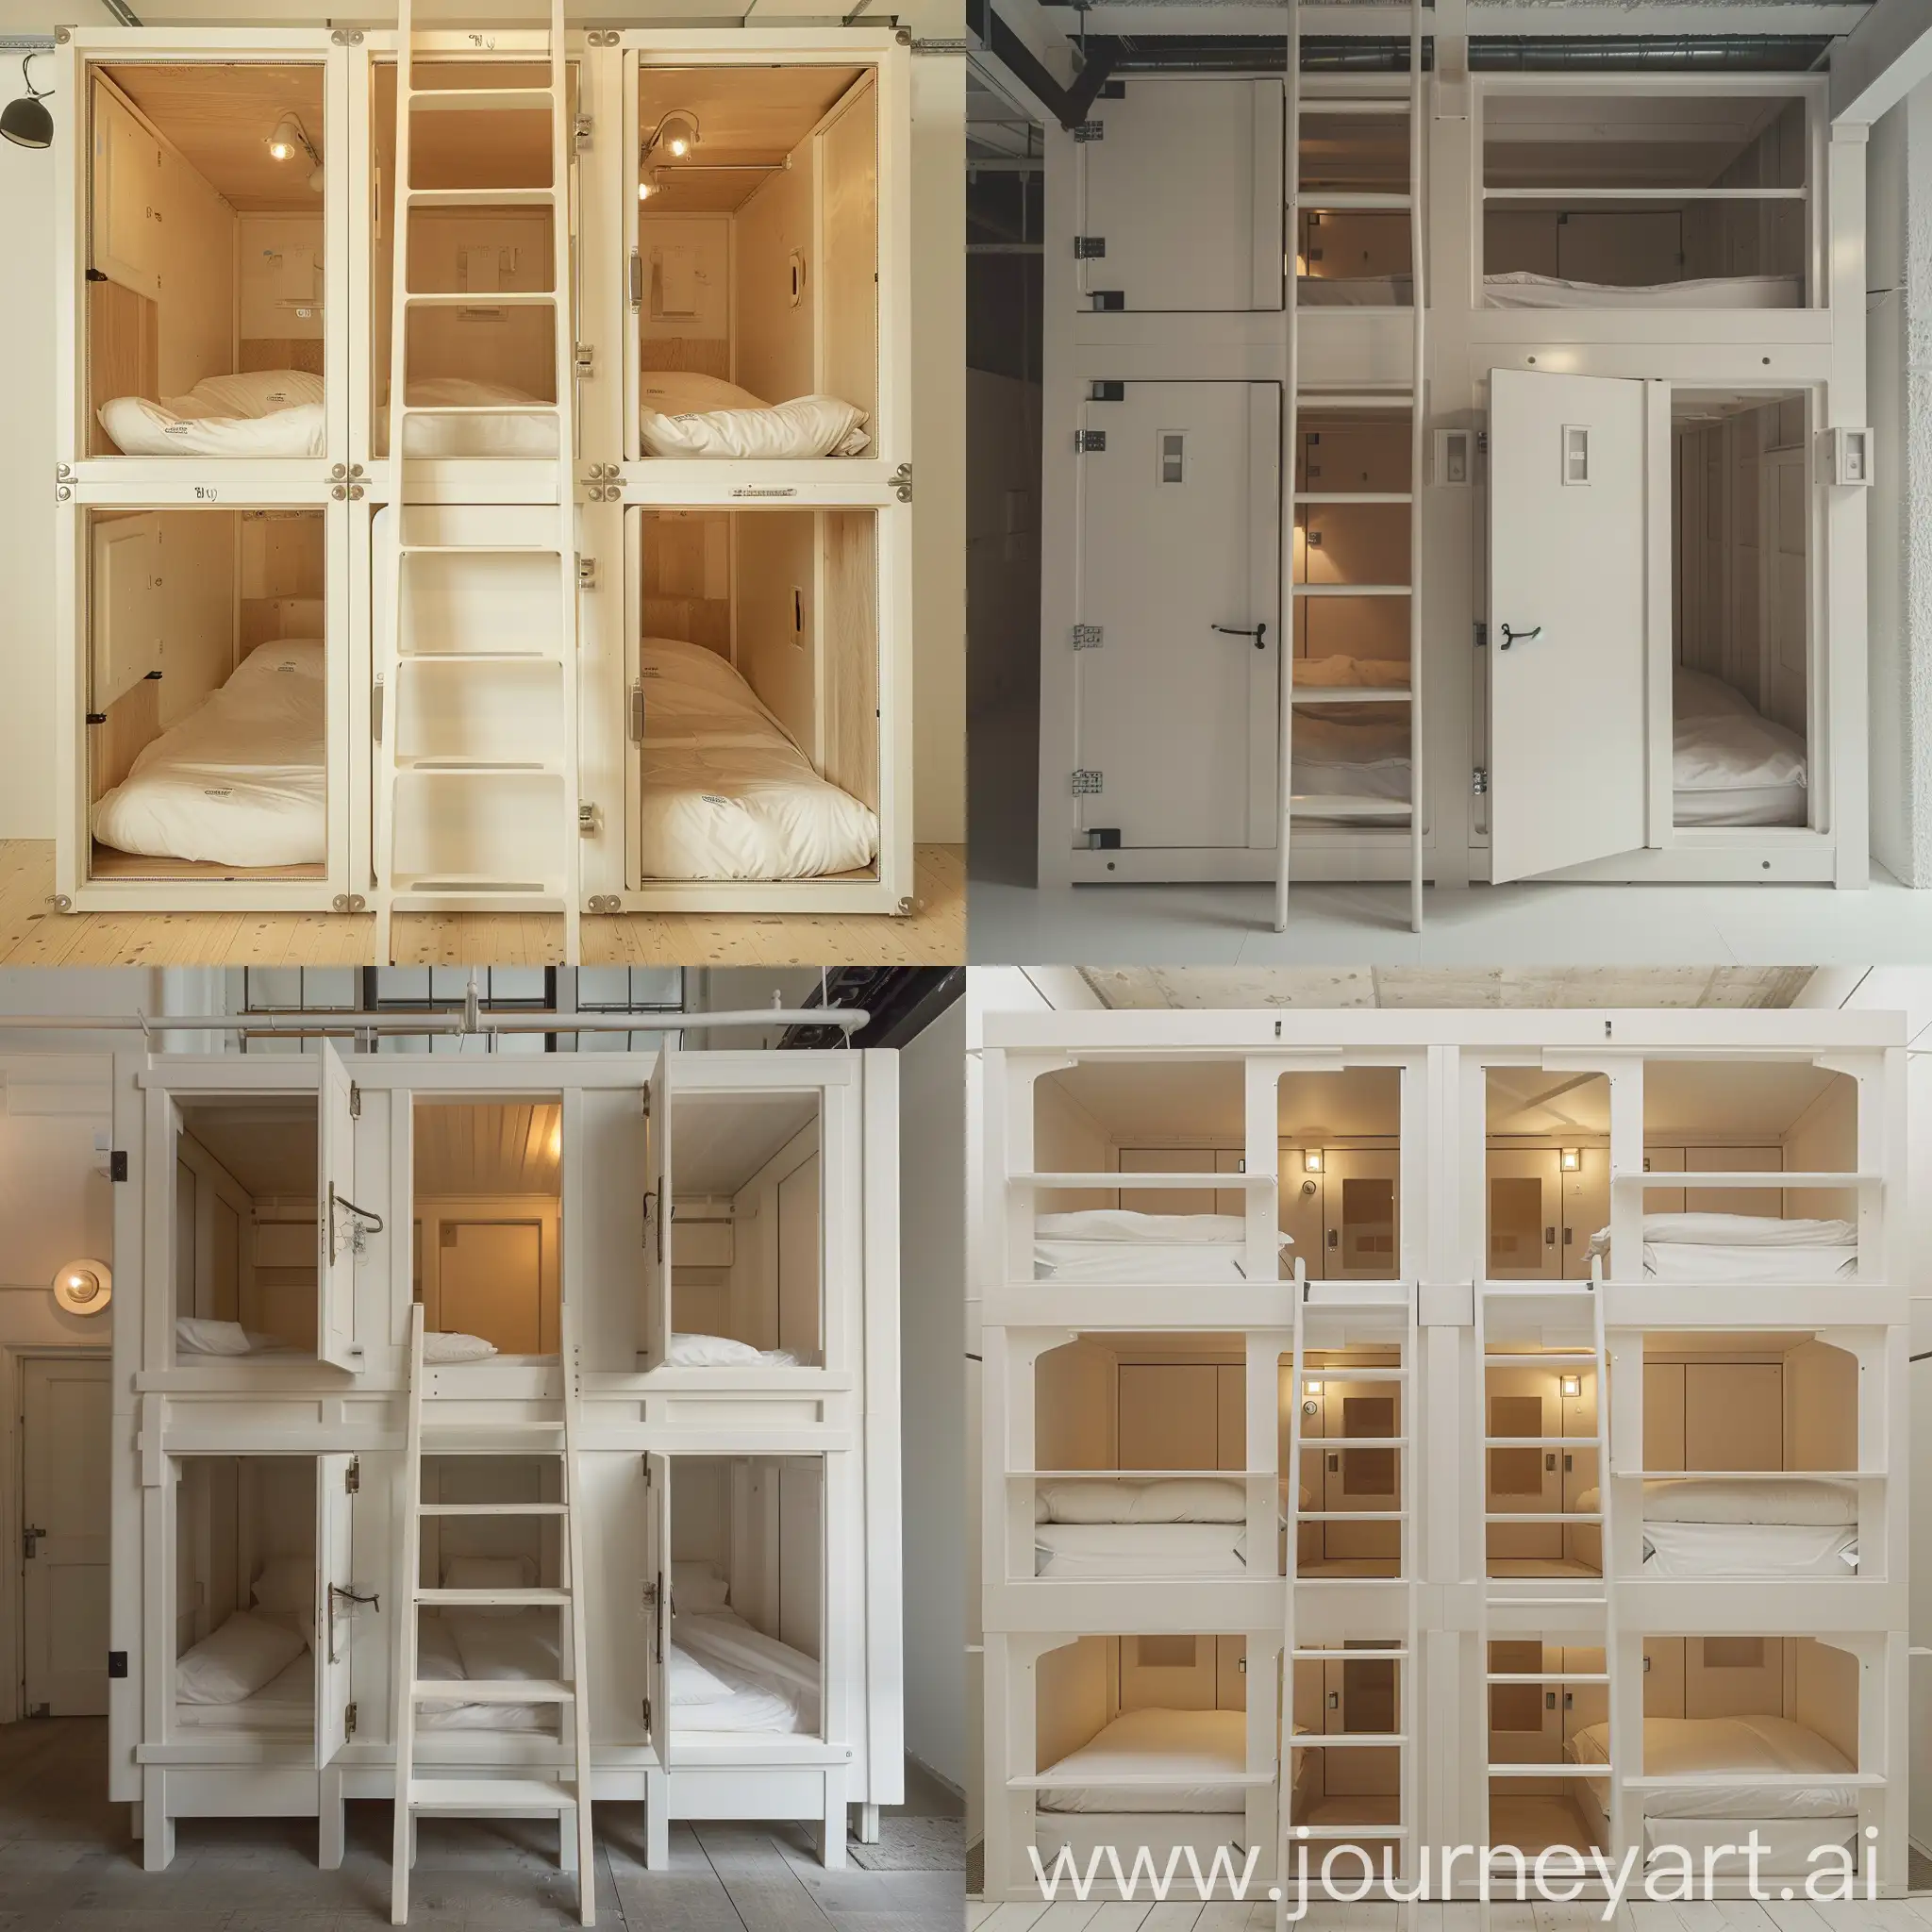 Minimalist-White-Wood-Capsule-Hotel-Room-with-Ladder-Access